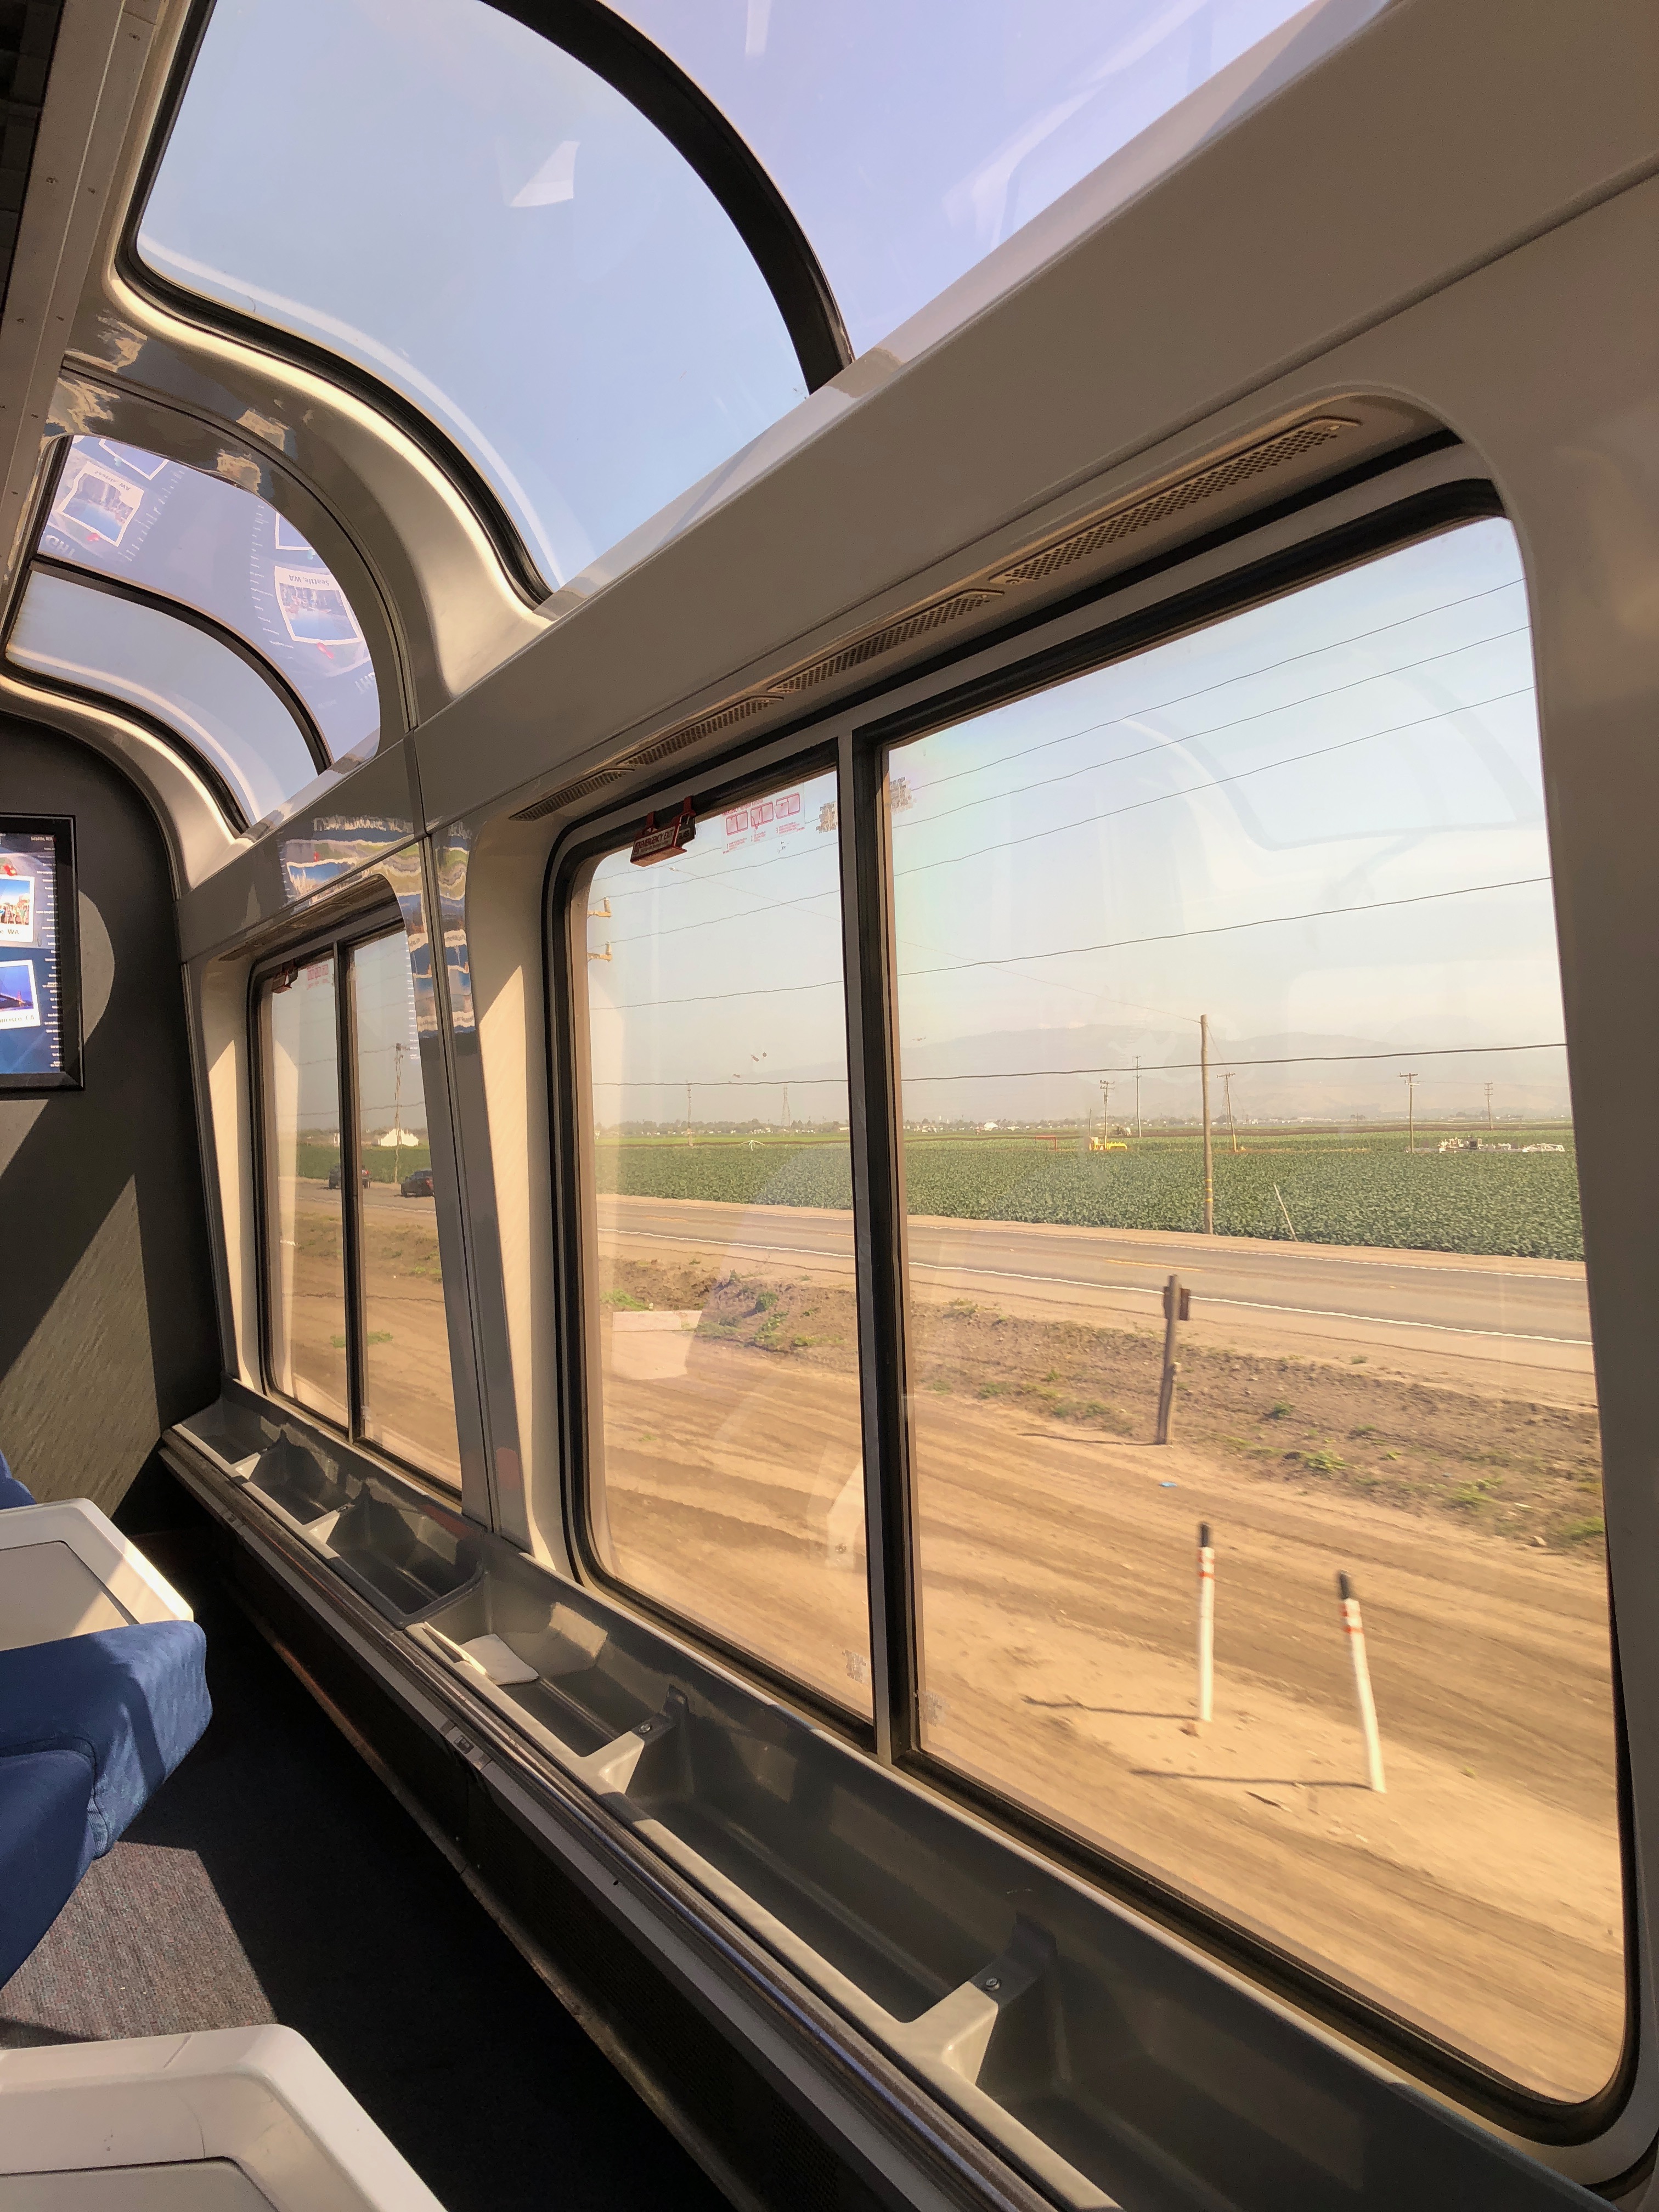 Are California Trains good for Travel?